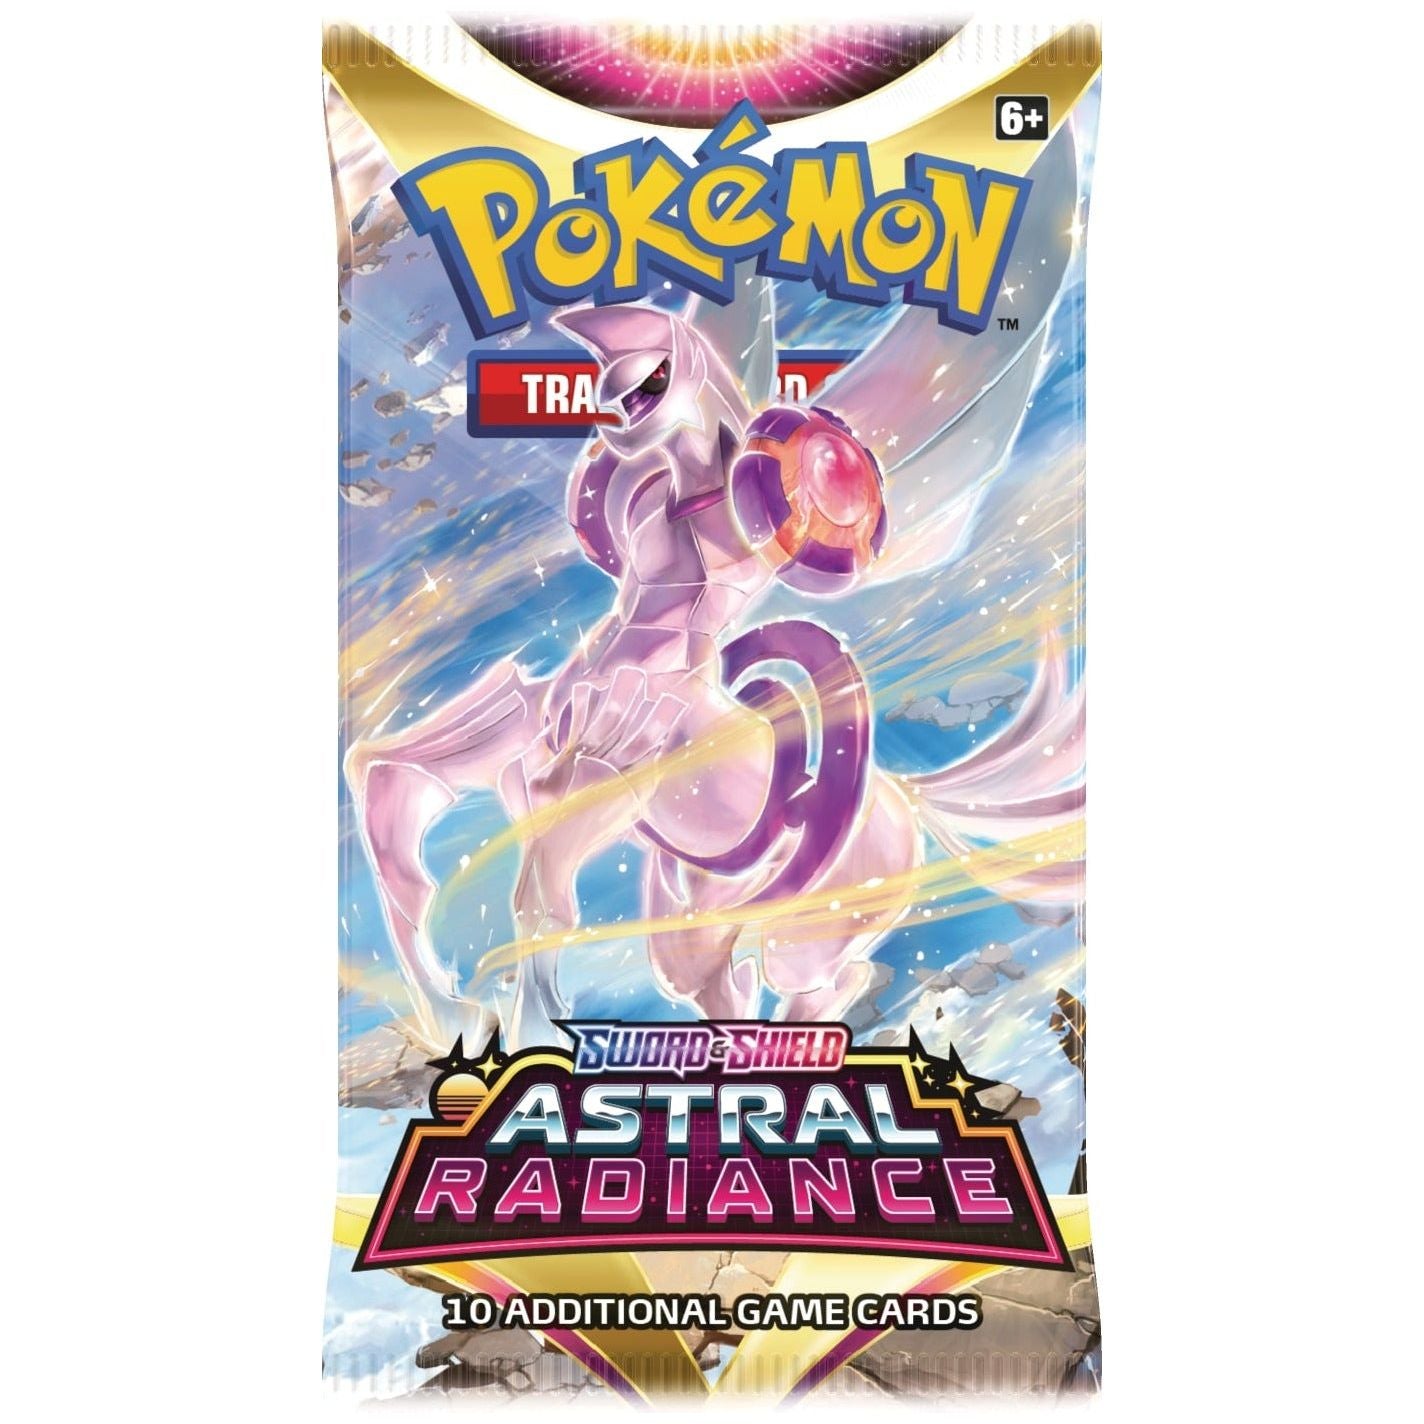 Pokemon - Sword & Shield Astral Radiance Booster Pack